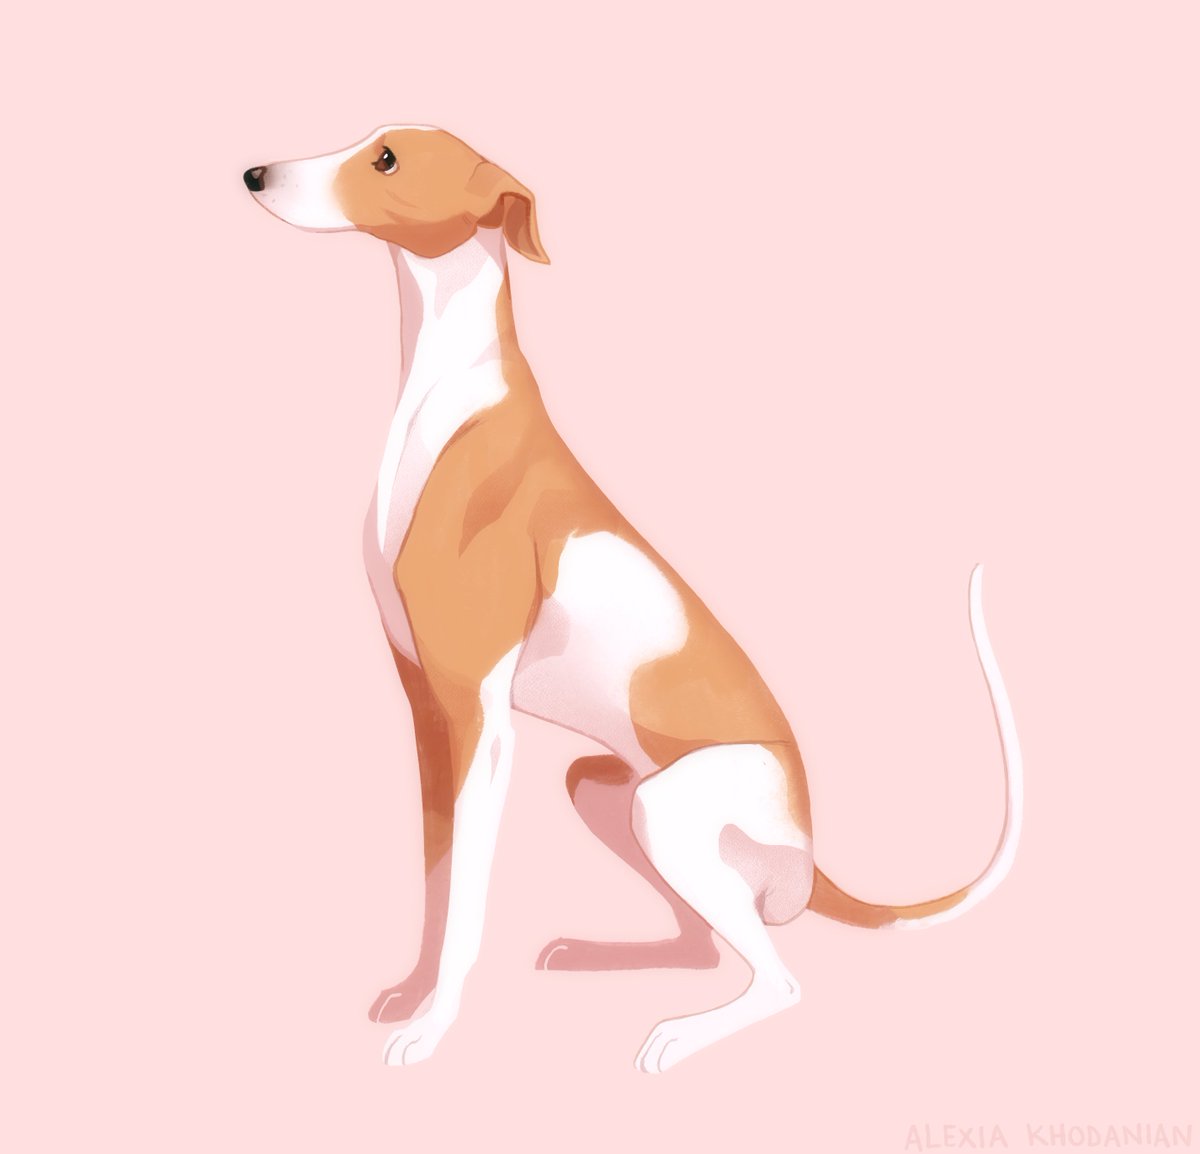  #Doggust day 12: My favorite doggie of all, the holy grail of creatures, my angel, my life, my soul, the greyhound!